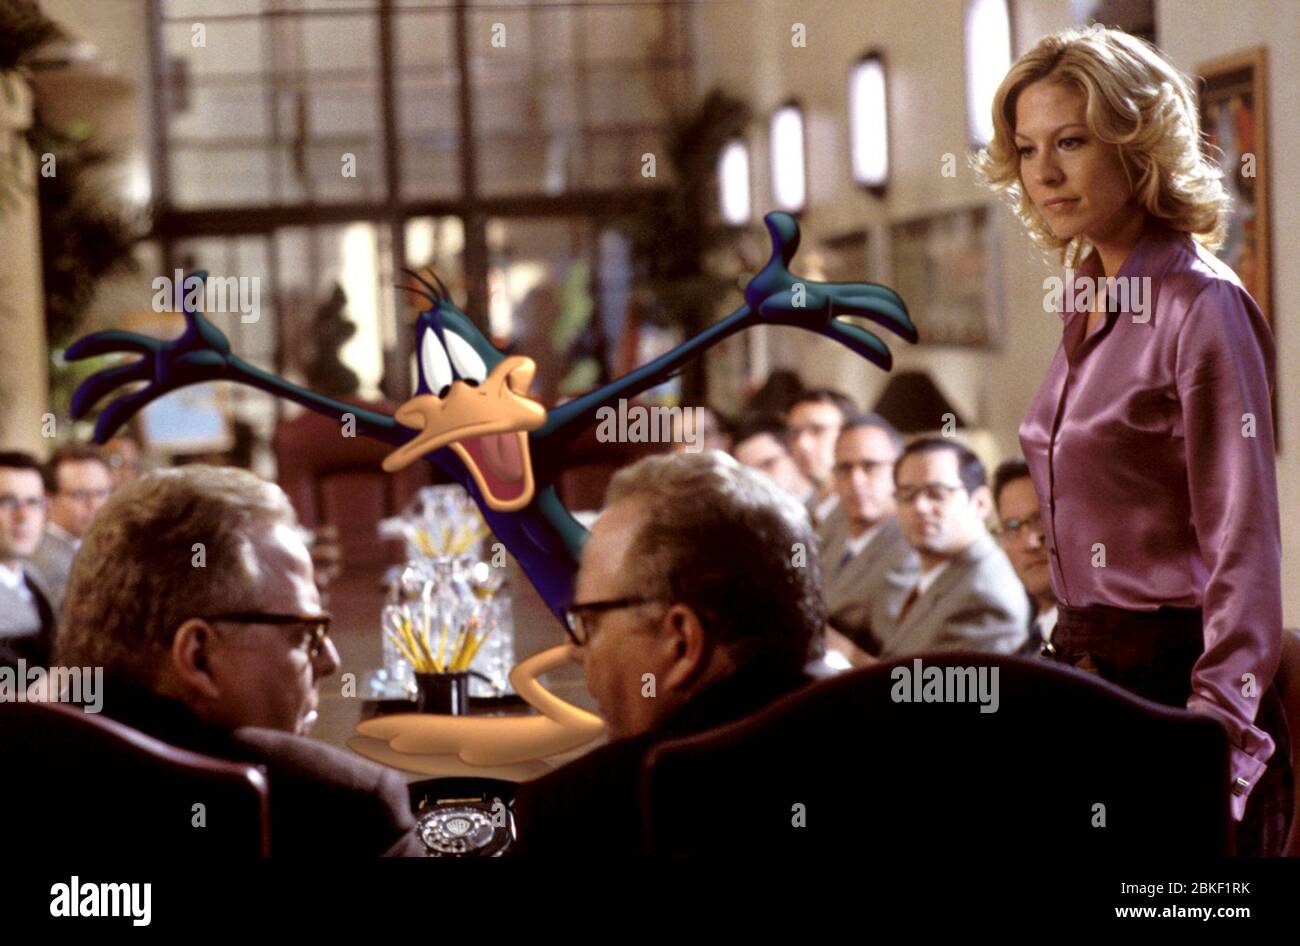 looney-tunes-back-in-action-stock-photo-alamy